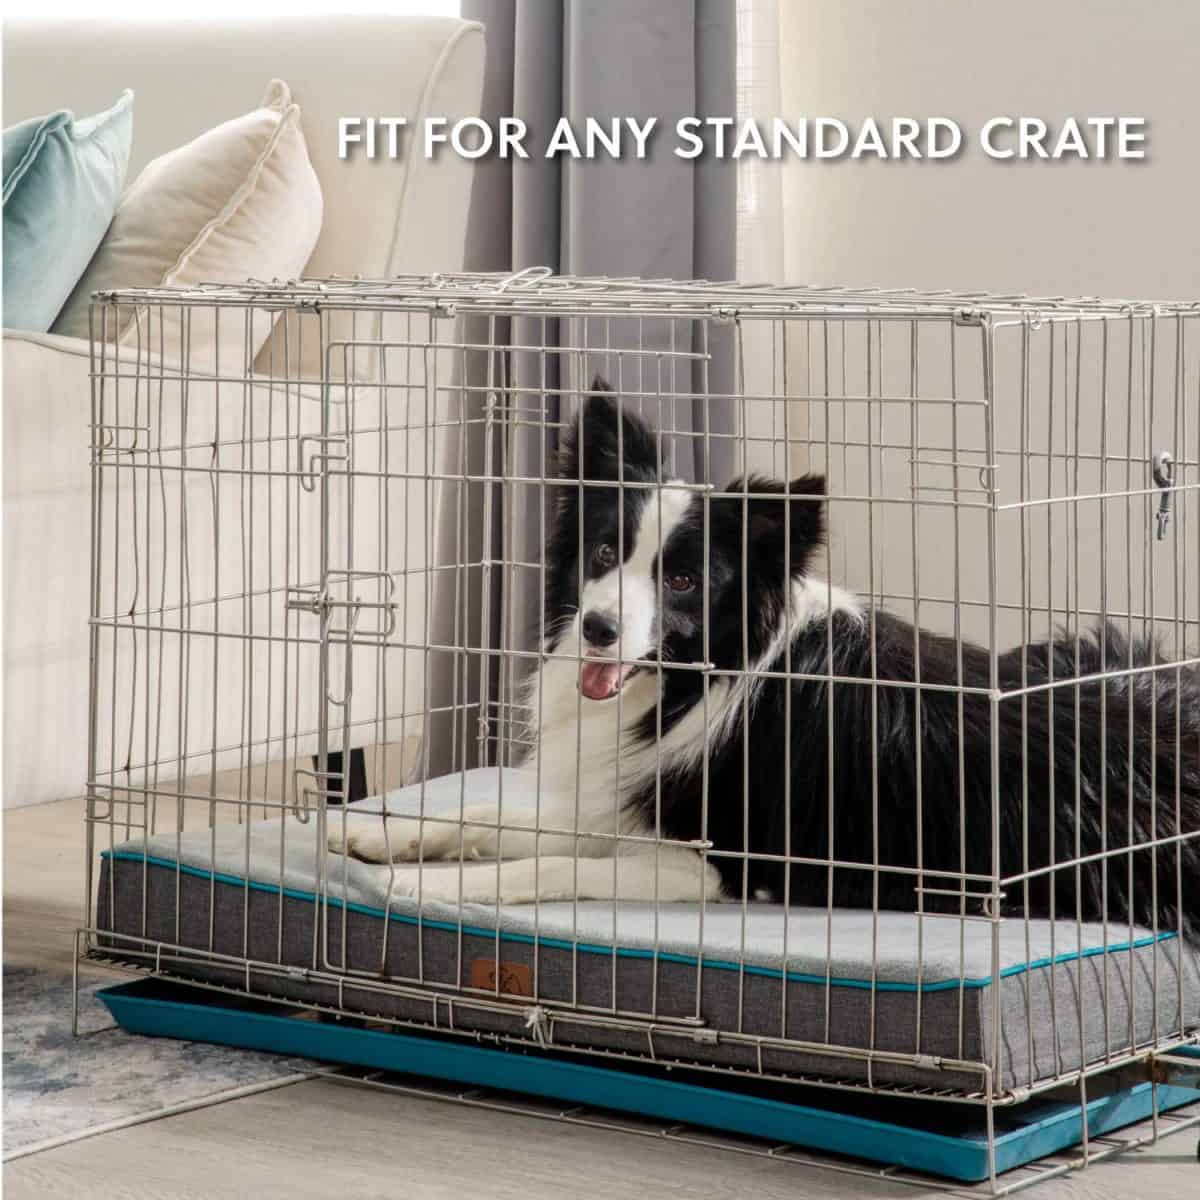 Bedsure Orthopedic Dog Bed Fit for cage